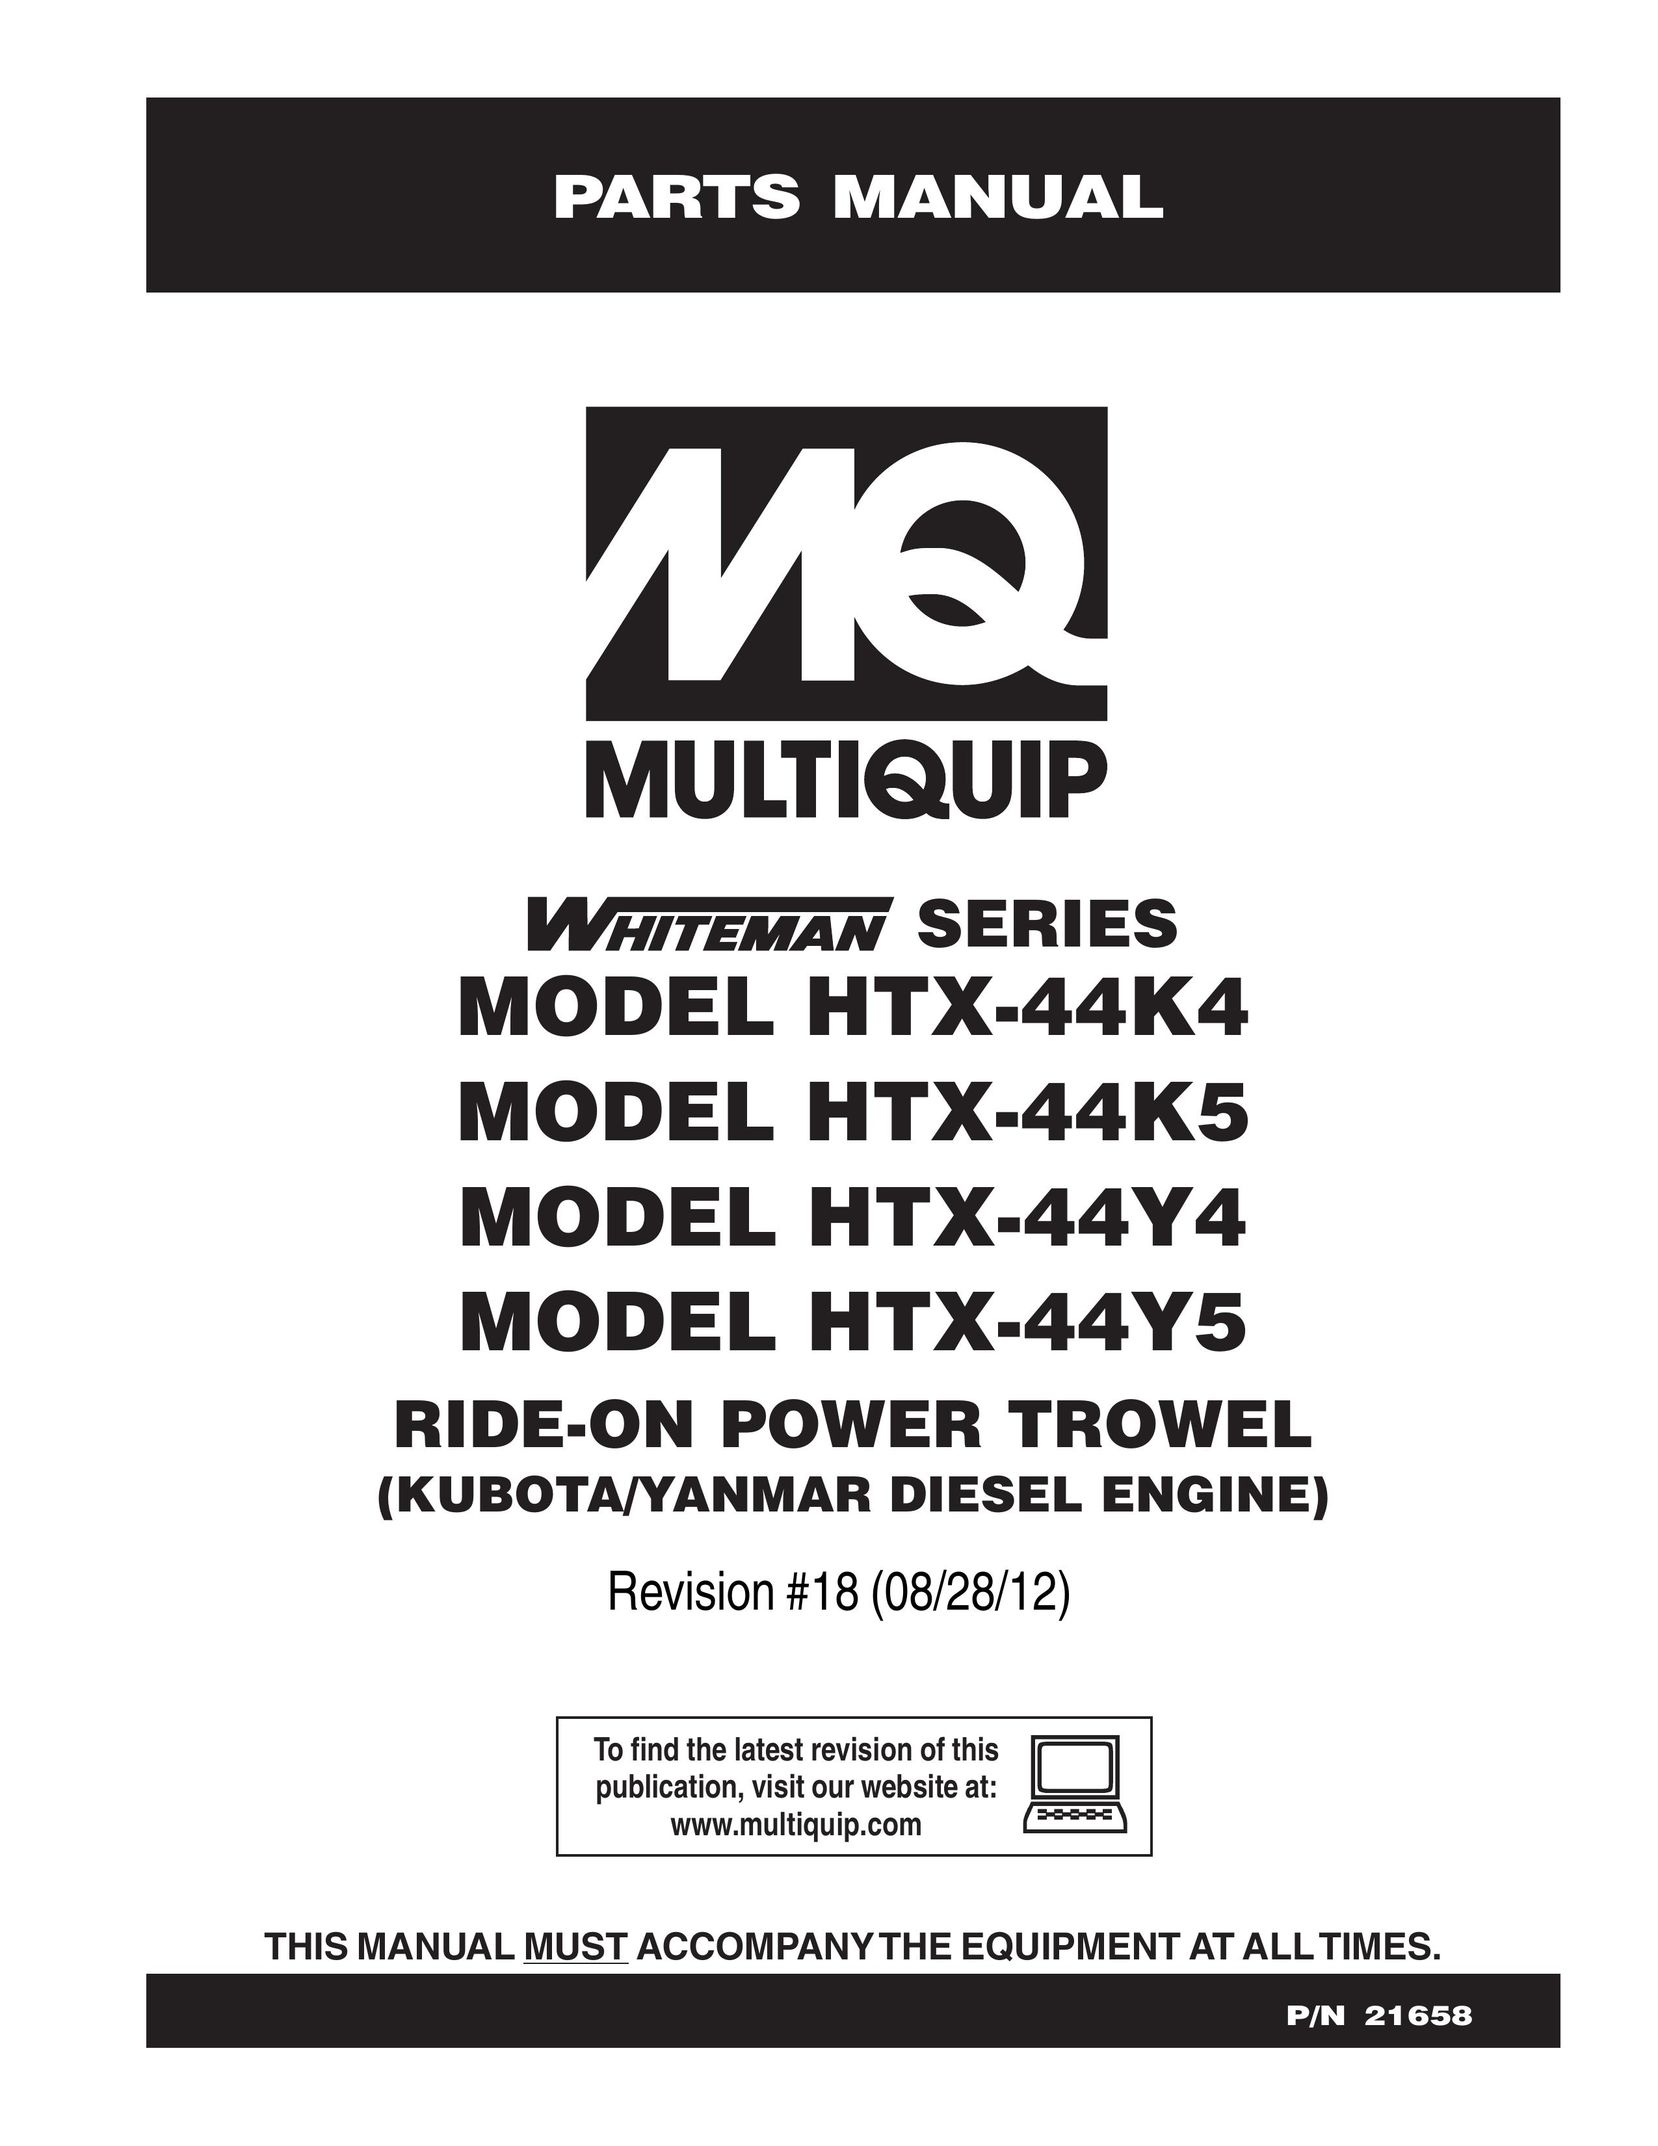 Multiquip HTX-44Y4 Riding Toy User Manual